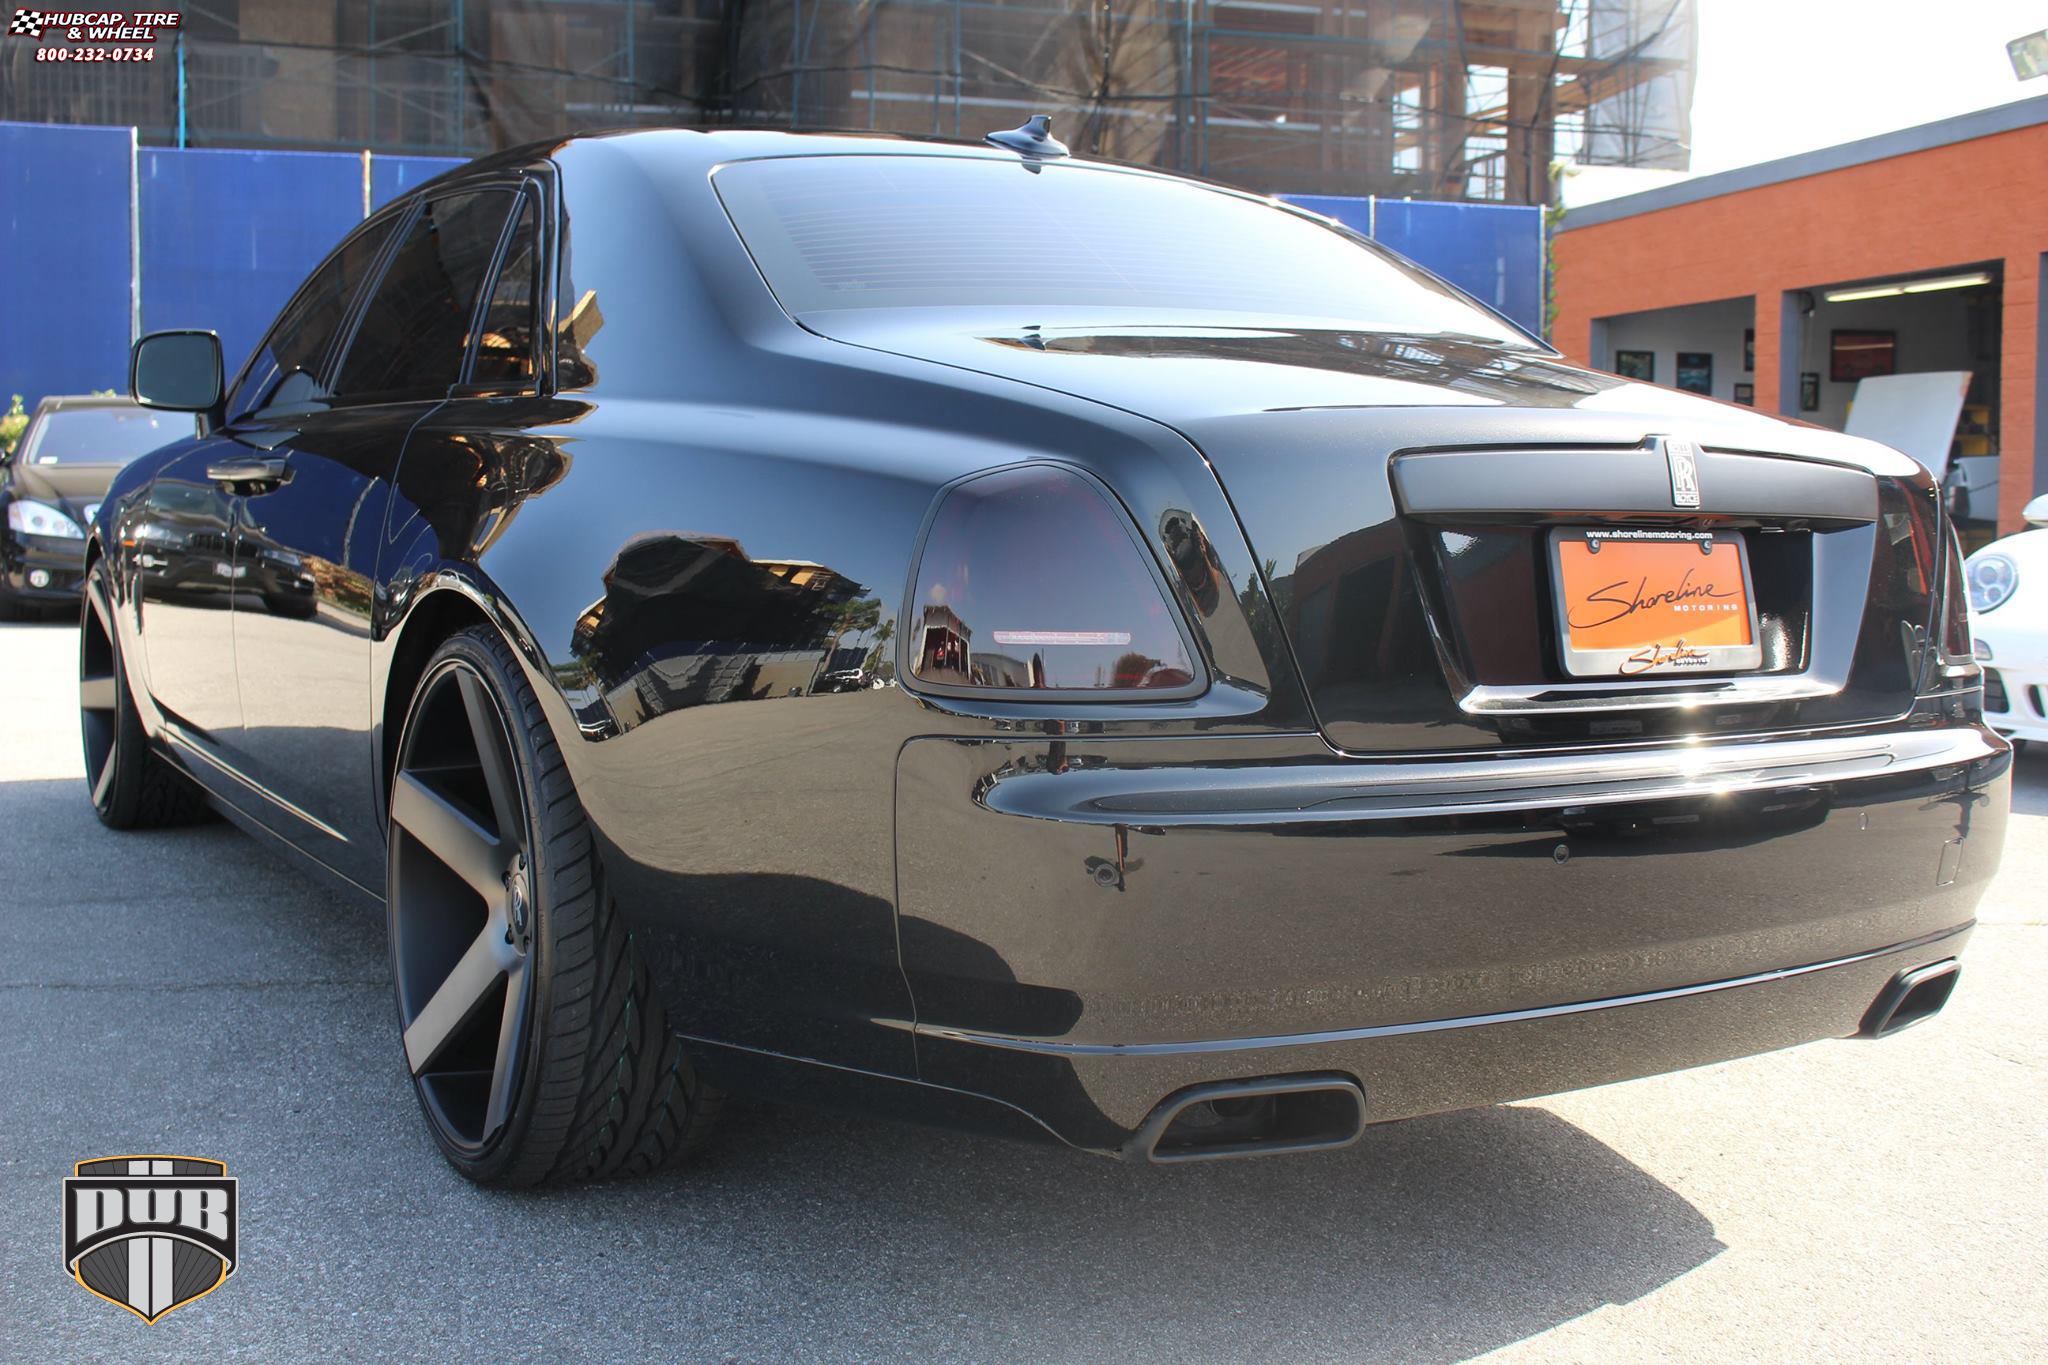 vehicle gallery/rolls royce ghost dub baller s116 24X10  Black & Machined with Dark Tint wheels and rims